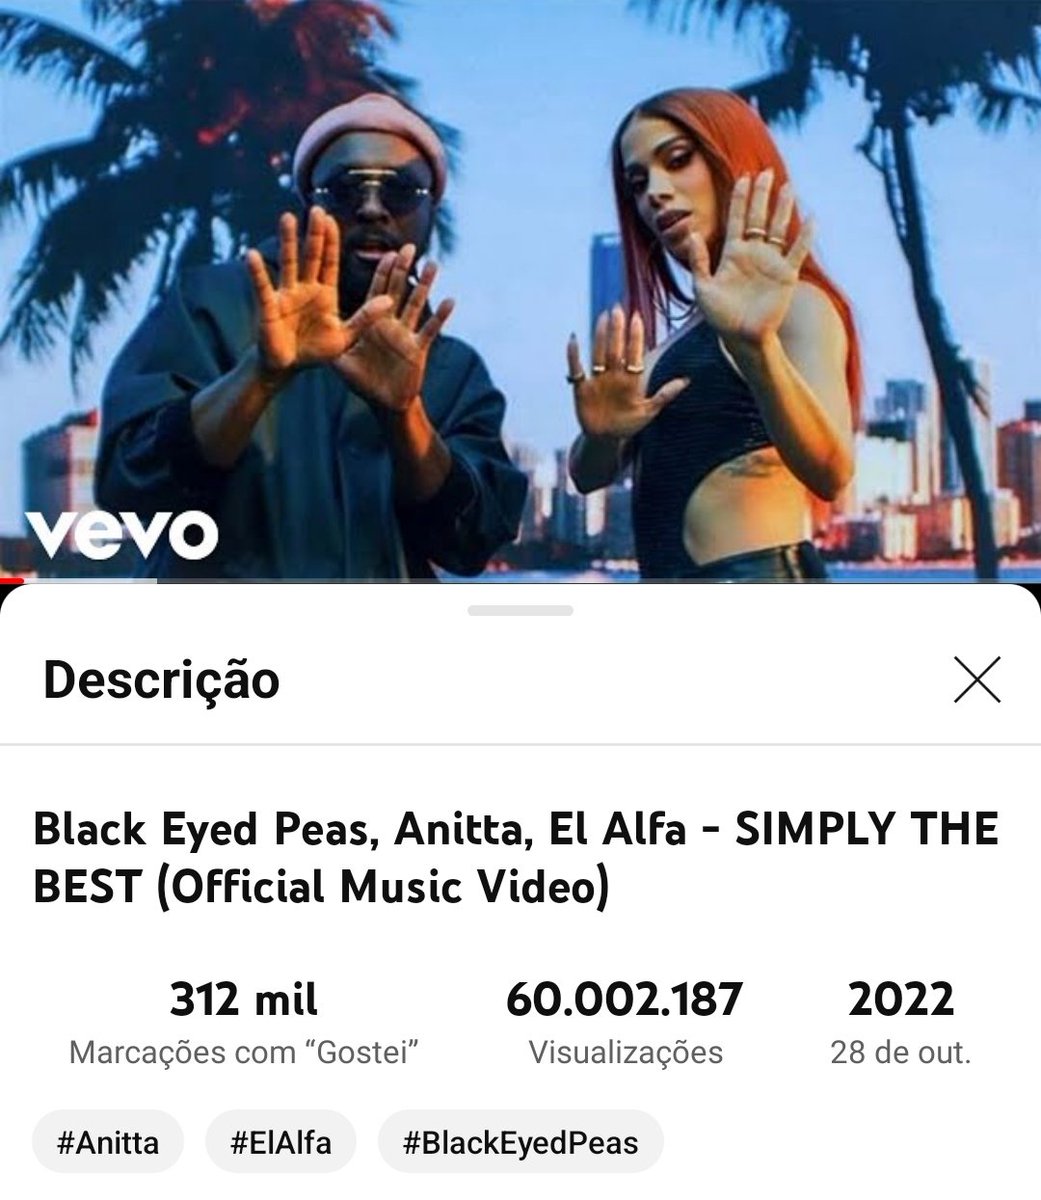 60 MILHÕES NO YOUTUBE!
SIMPLY THE BEST